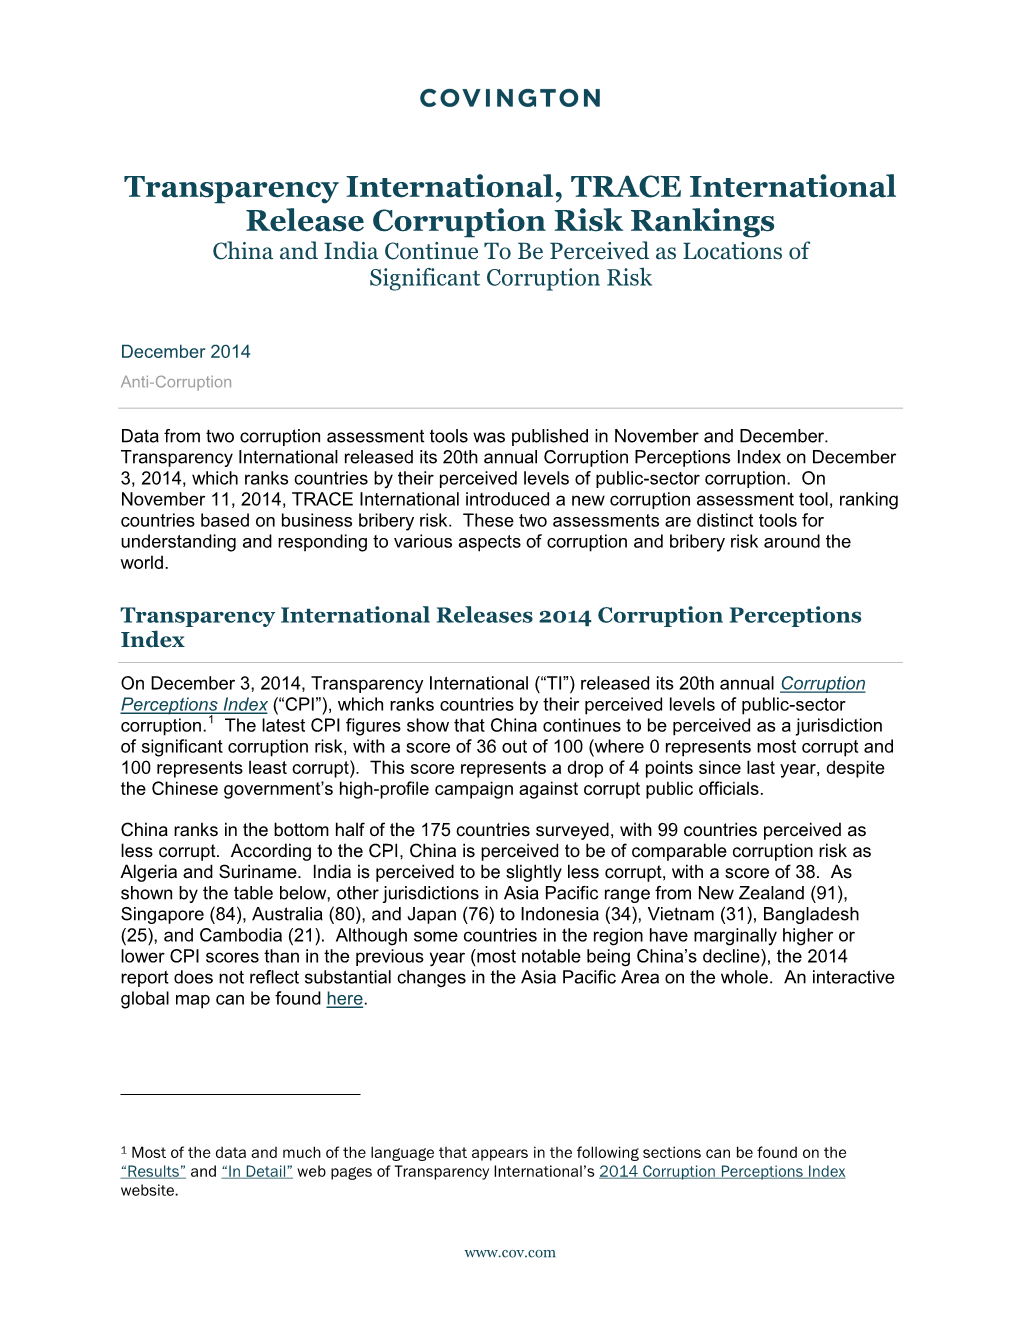 Transparency International, TRACE International Release Corruption Risk Rankings China and India Continue to Be Perceived As Locations of Significant Corruption Risk